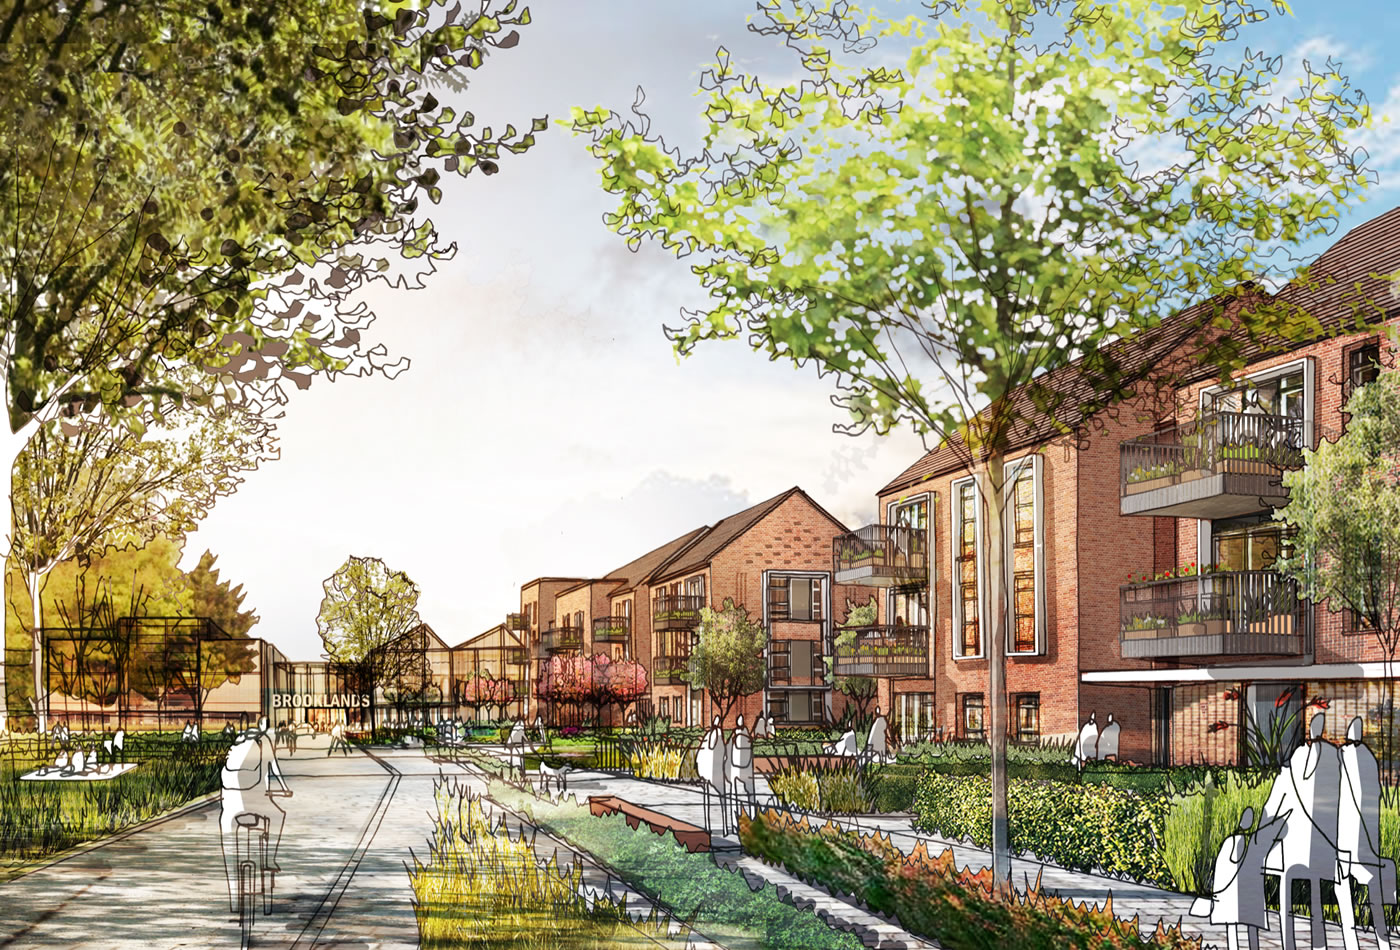 Plans Submitted for Enhanced Brooklands College, Community Facilities and New Homes in Weybridge